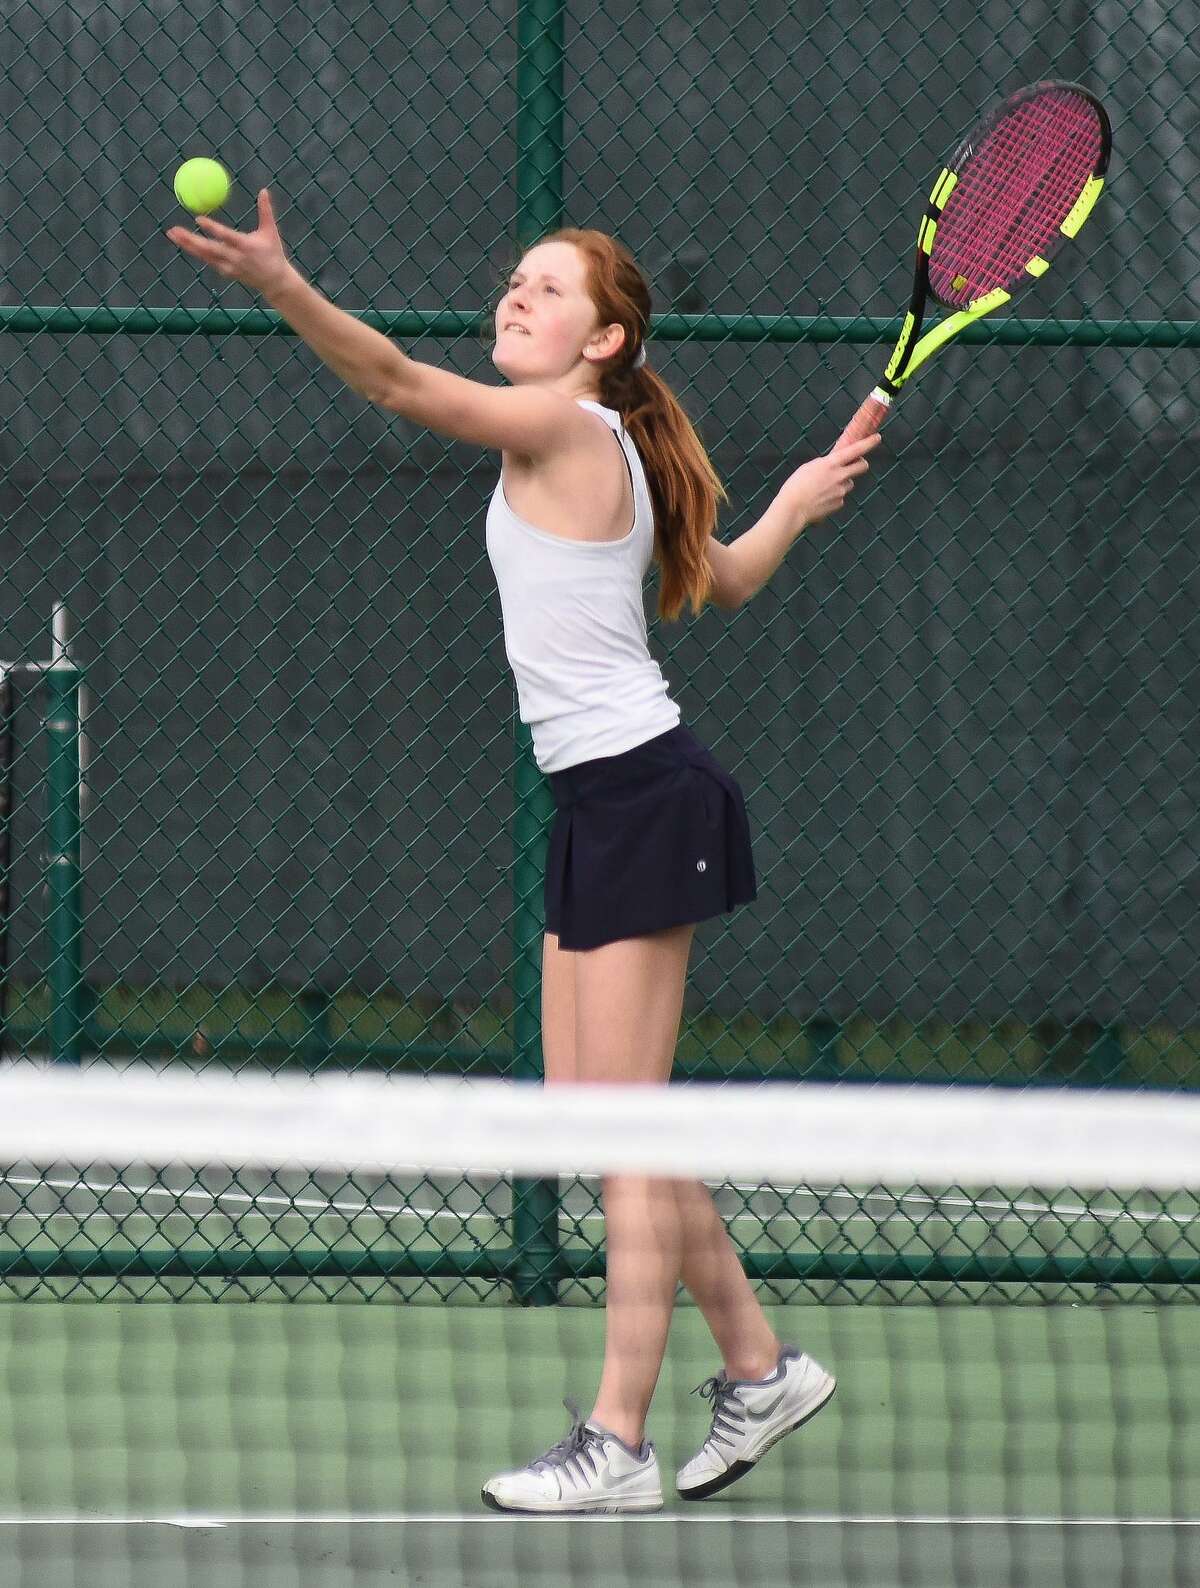 Greens Farms Academy junior Kate Flicker posted a singles win against Loomis Chaffee in the girls tennis team's 7-2 win overall. Flicker was the only Dragon to post a win in the team's opener against Hotchkiss.